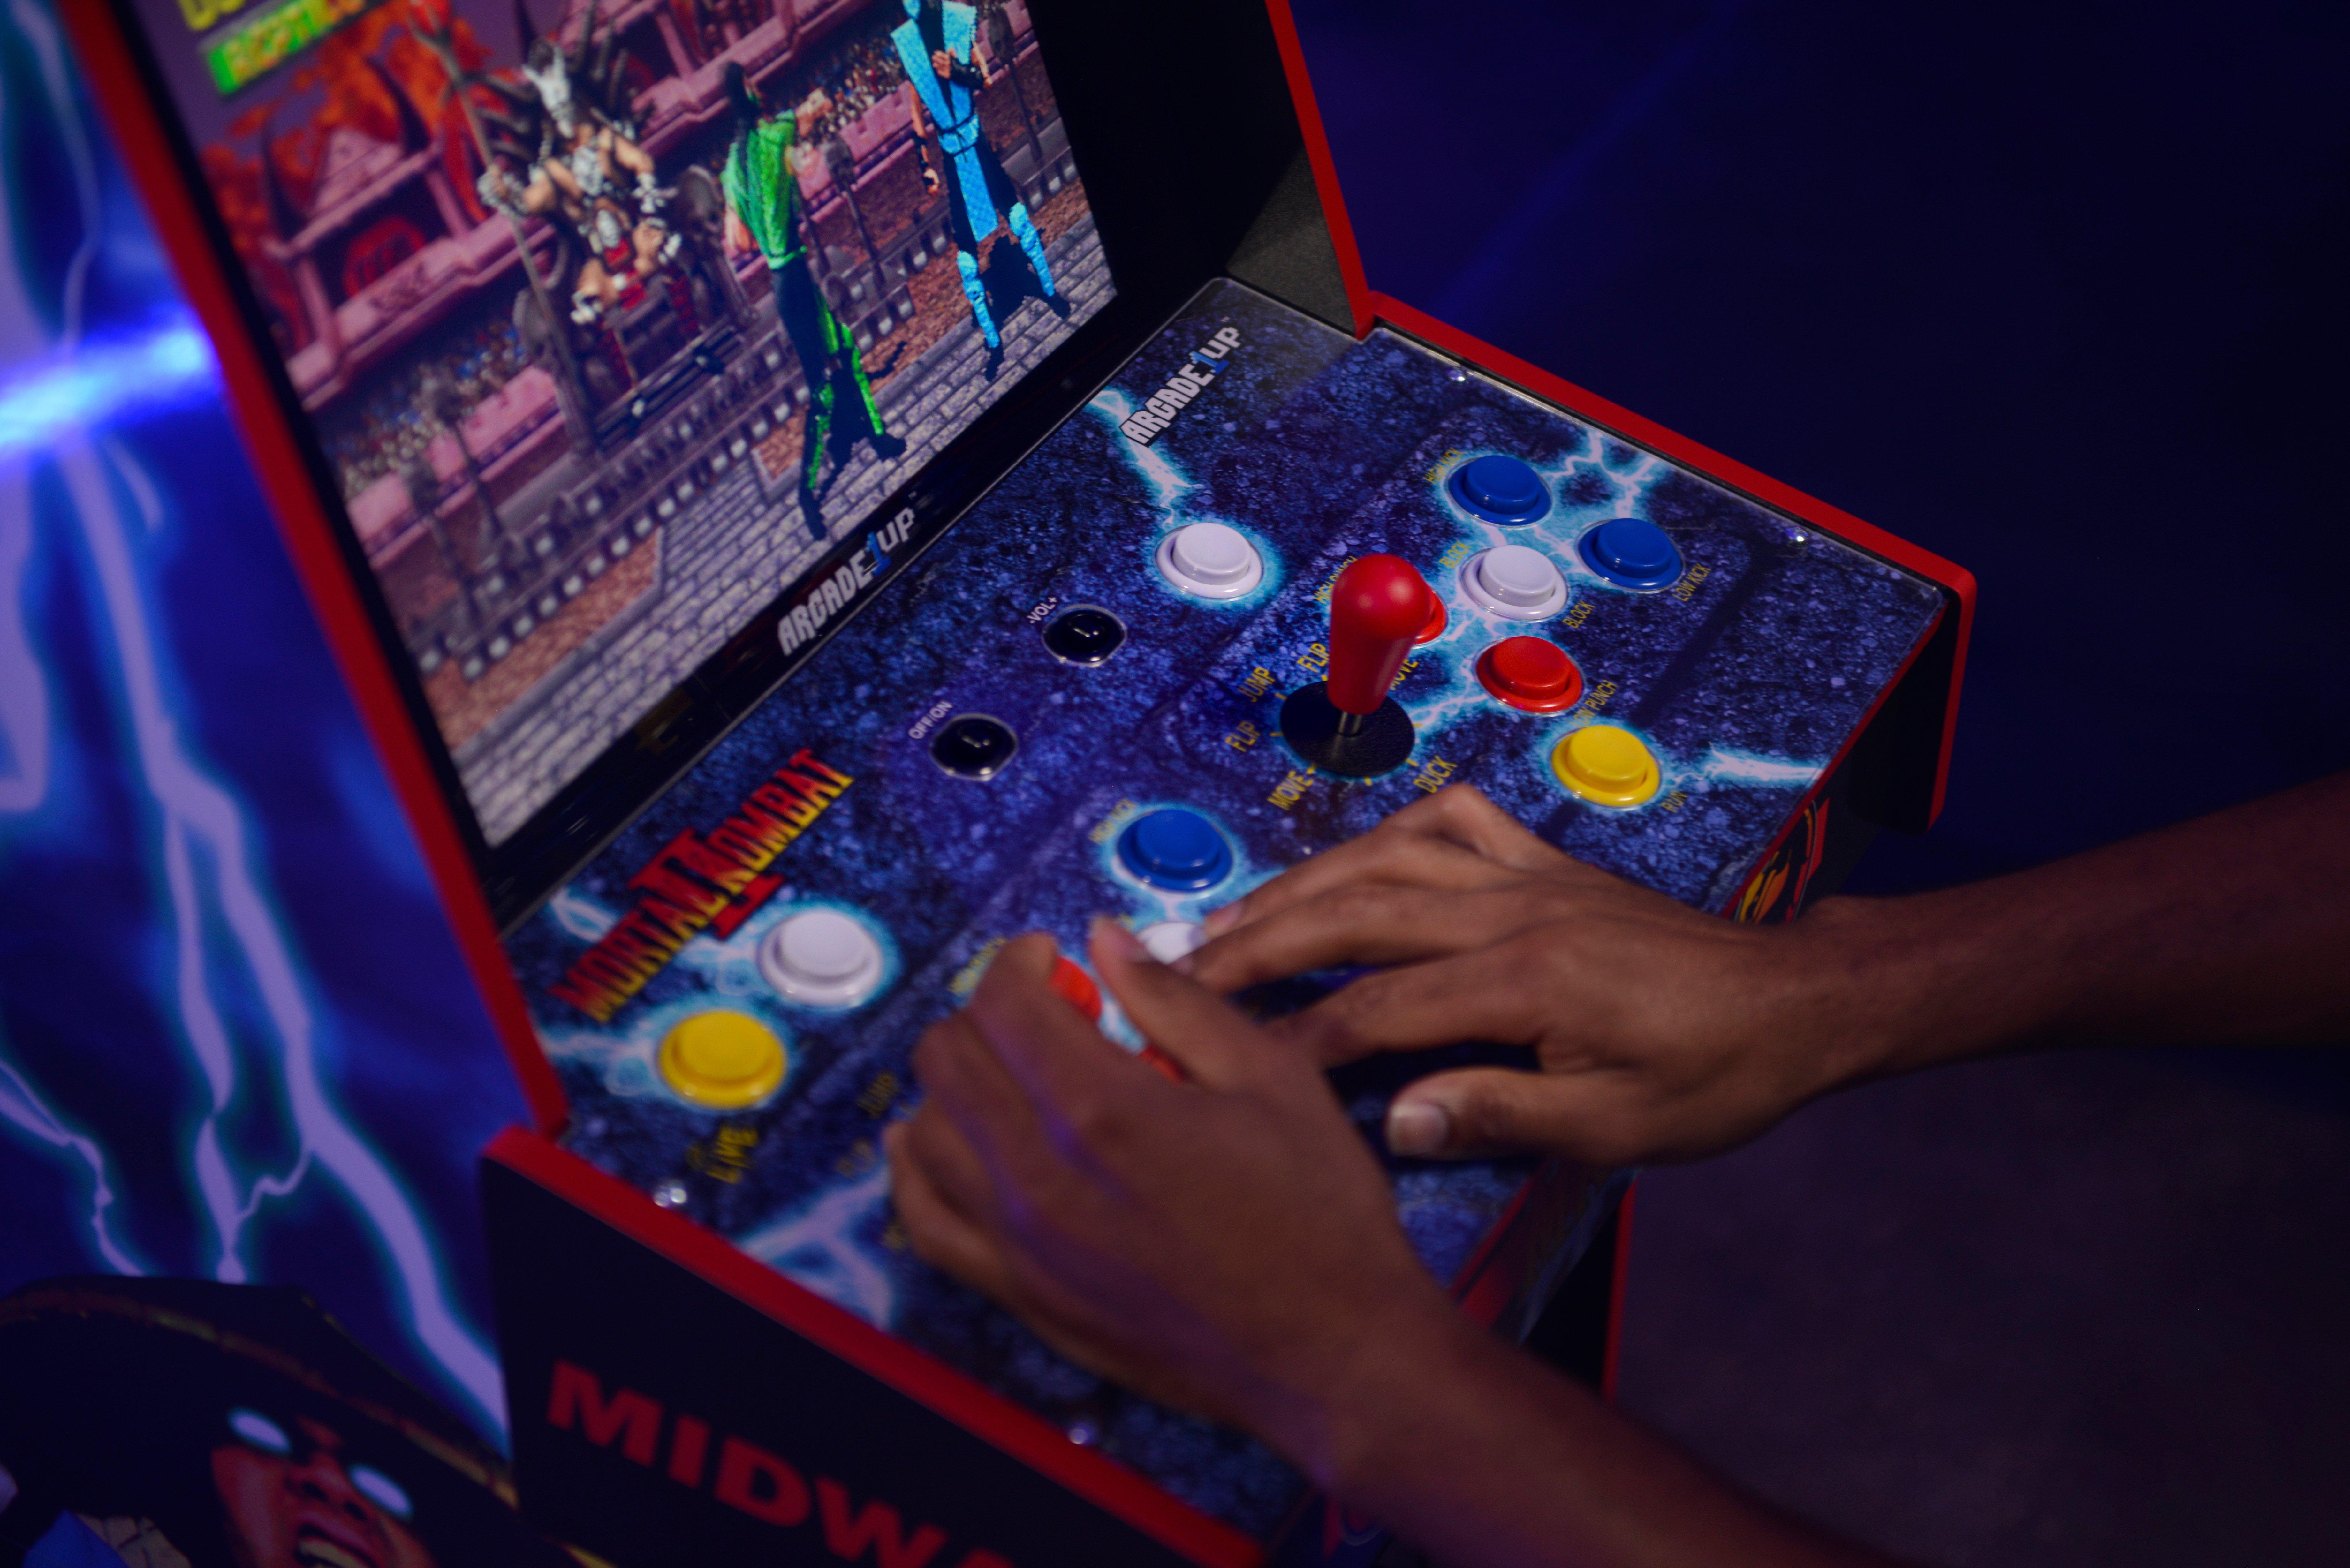 Arcade1Up Releases New Deluxe, Throwback Arcade Machines